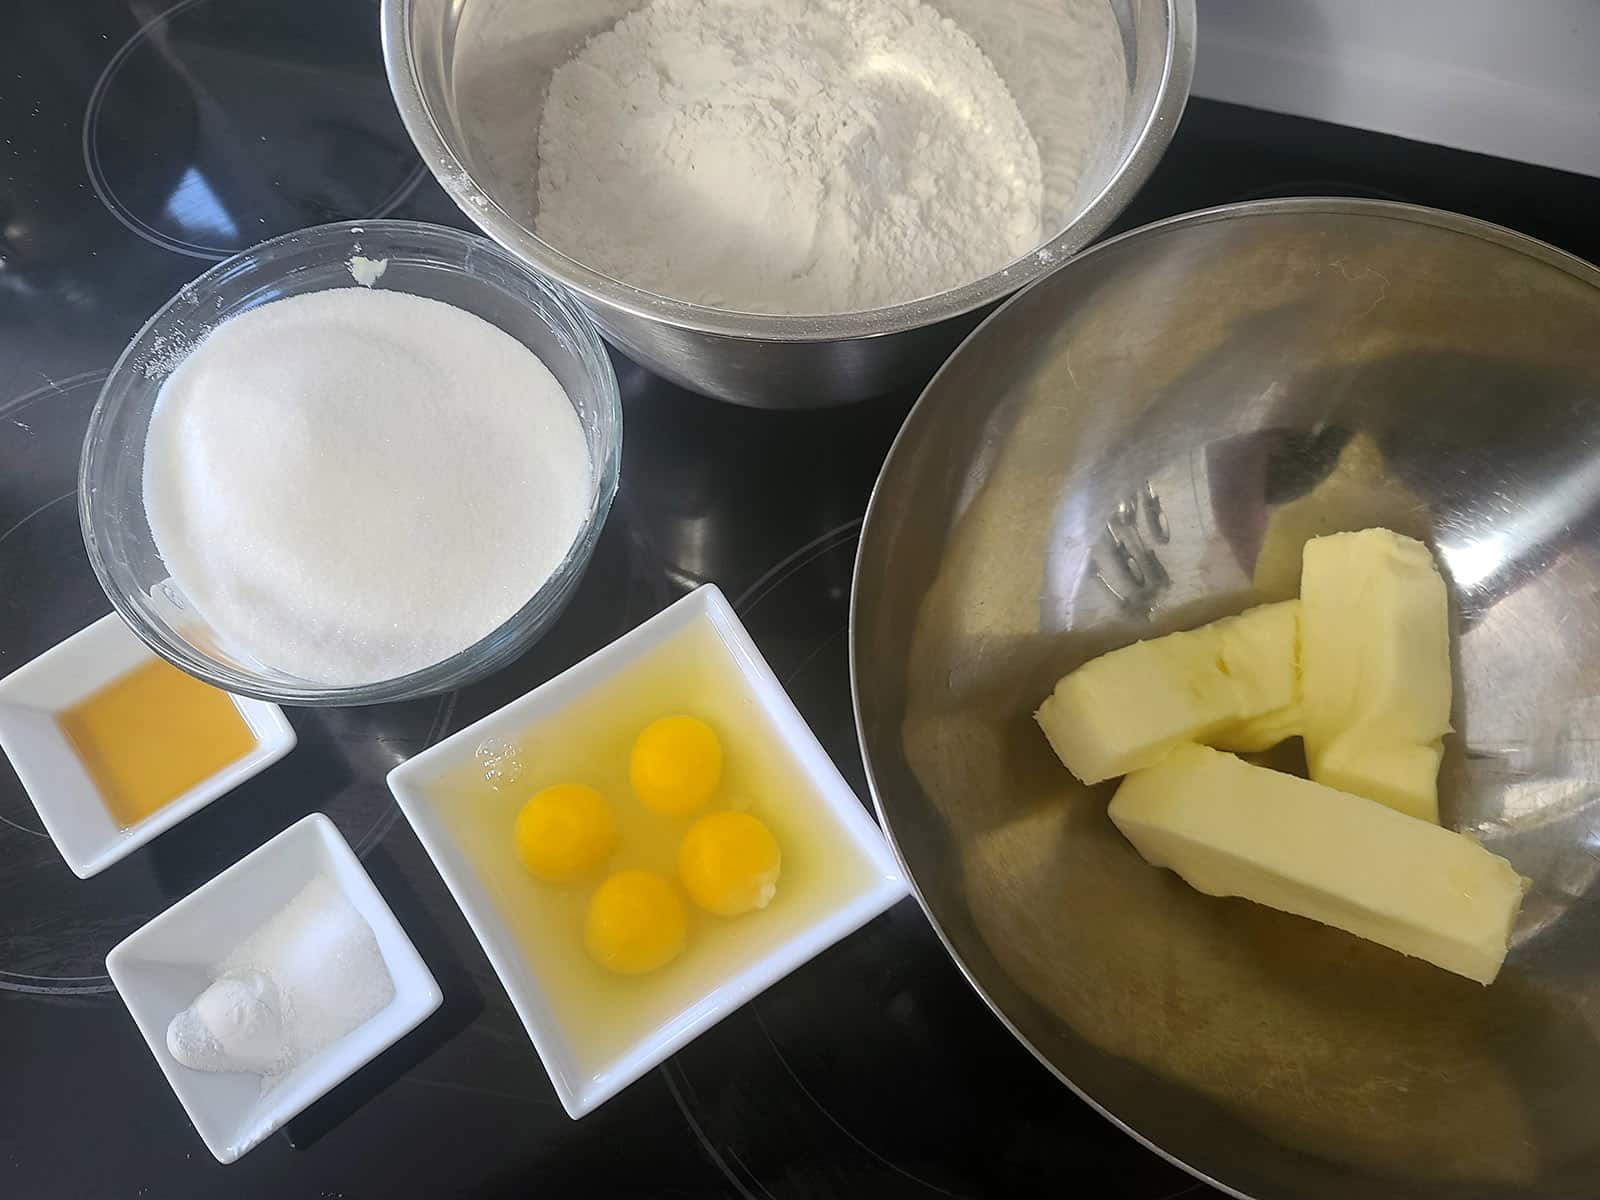 All of the ingredients for this recipe, arranged on a stove top.